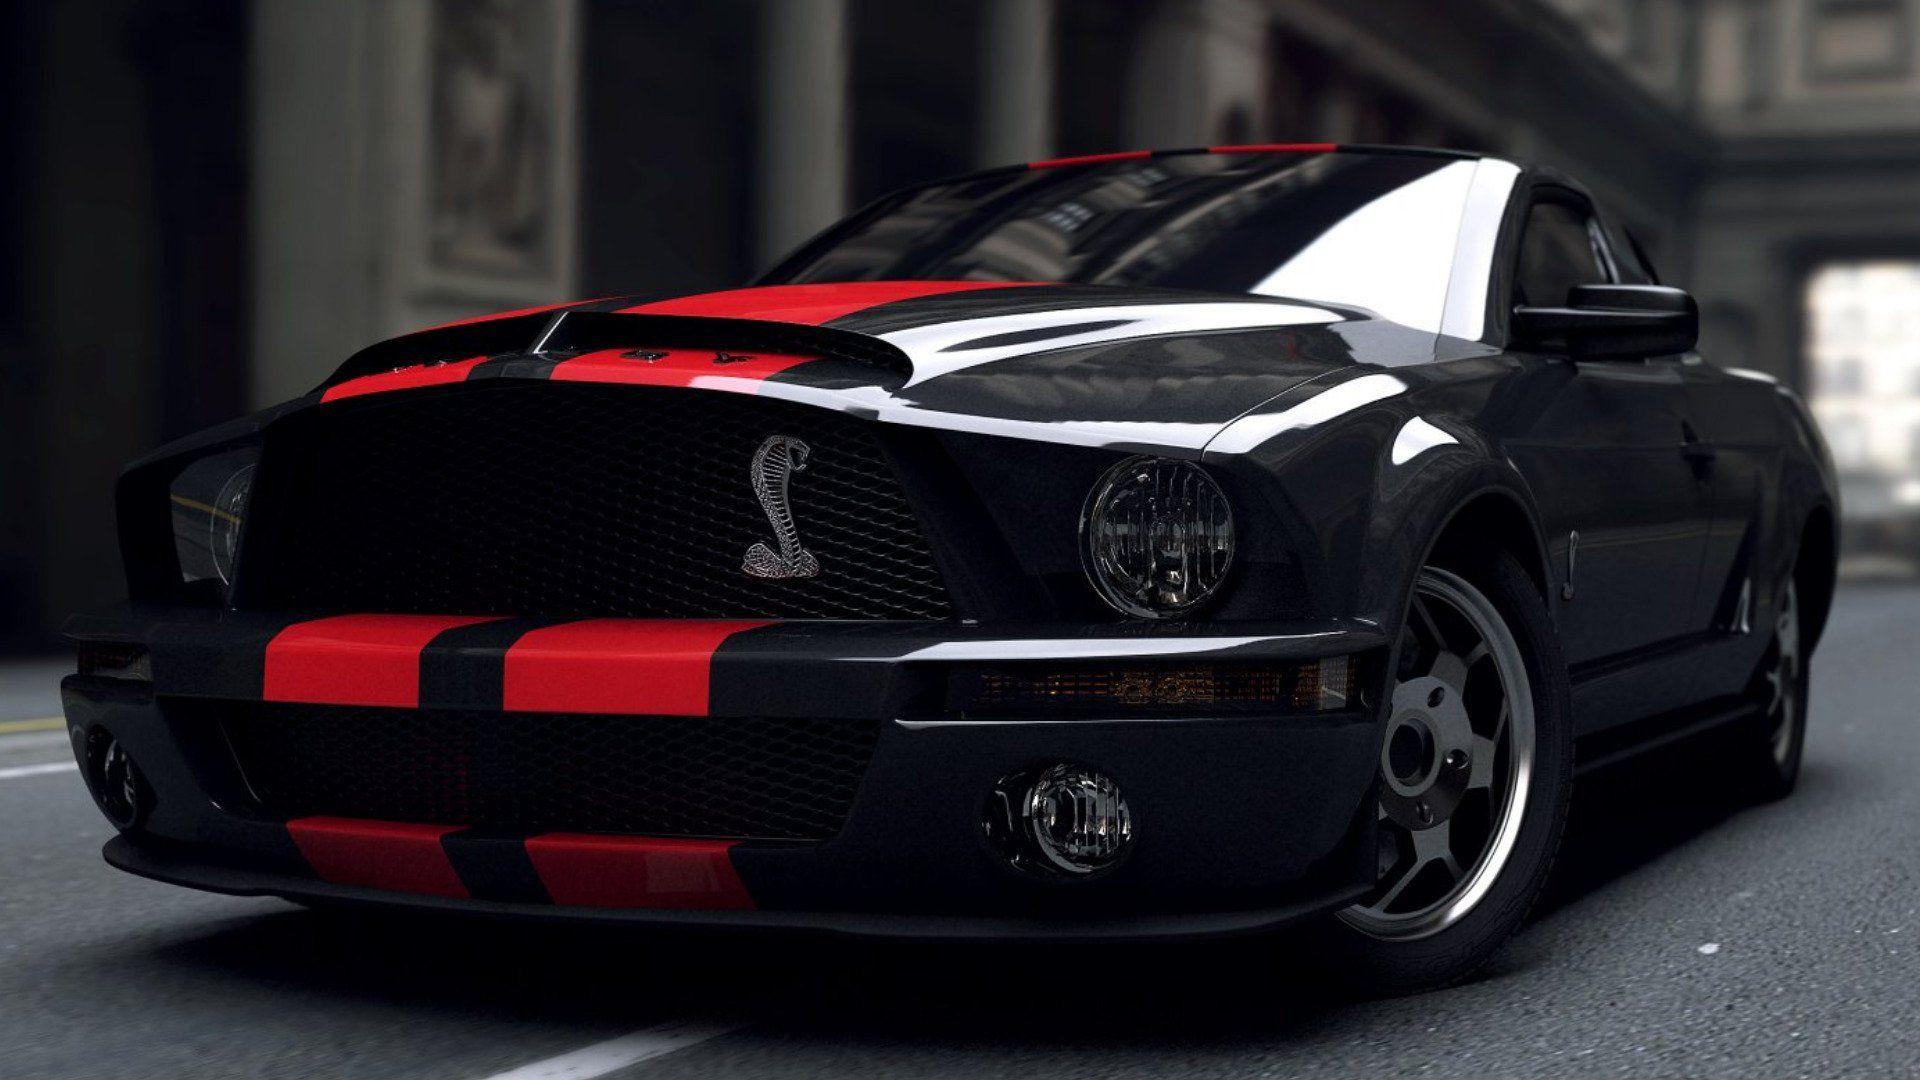 Ford Mustang Shelby GT500 HD Wallpapers - Wallpaper Cave